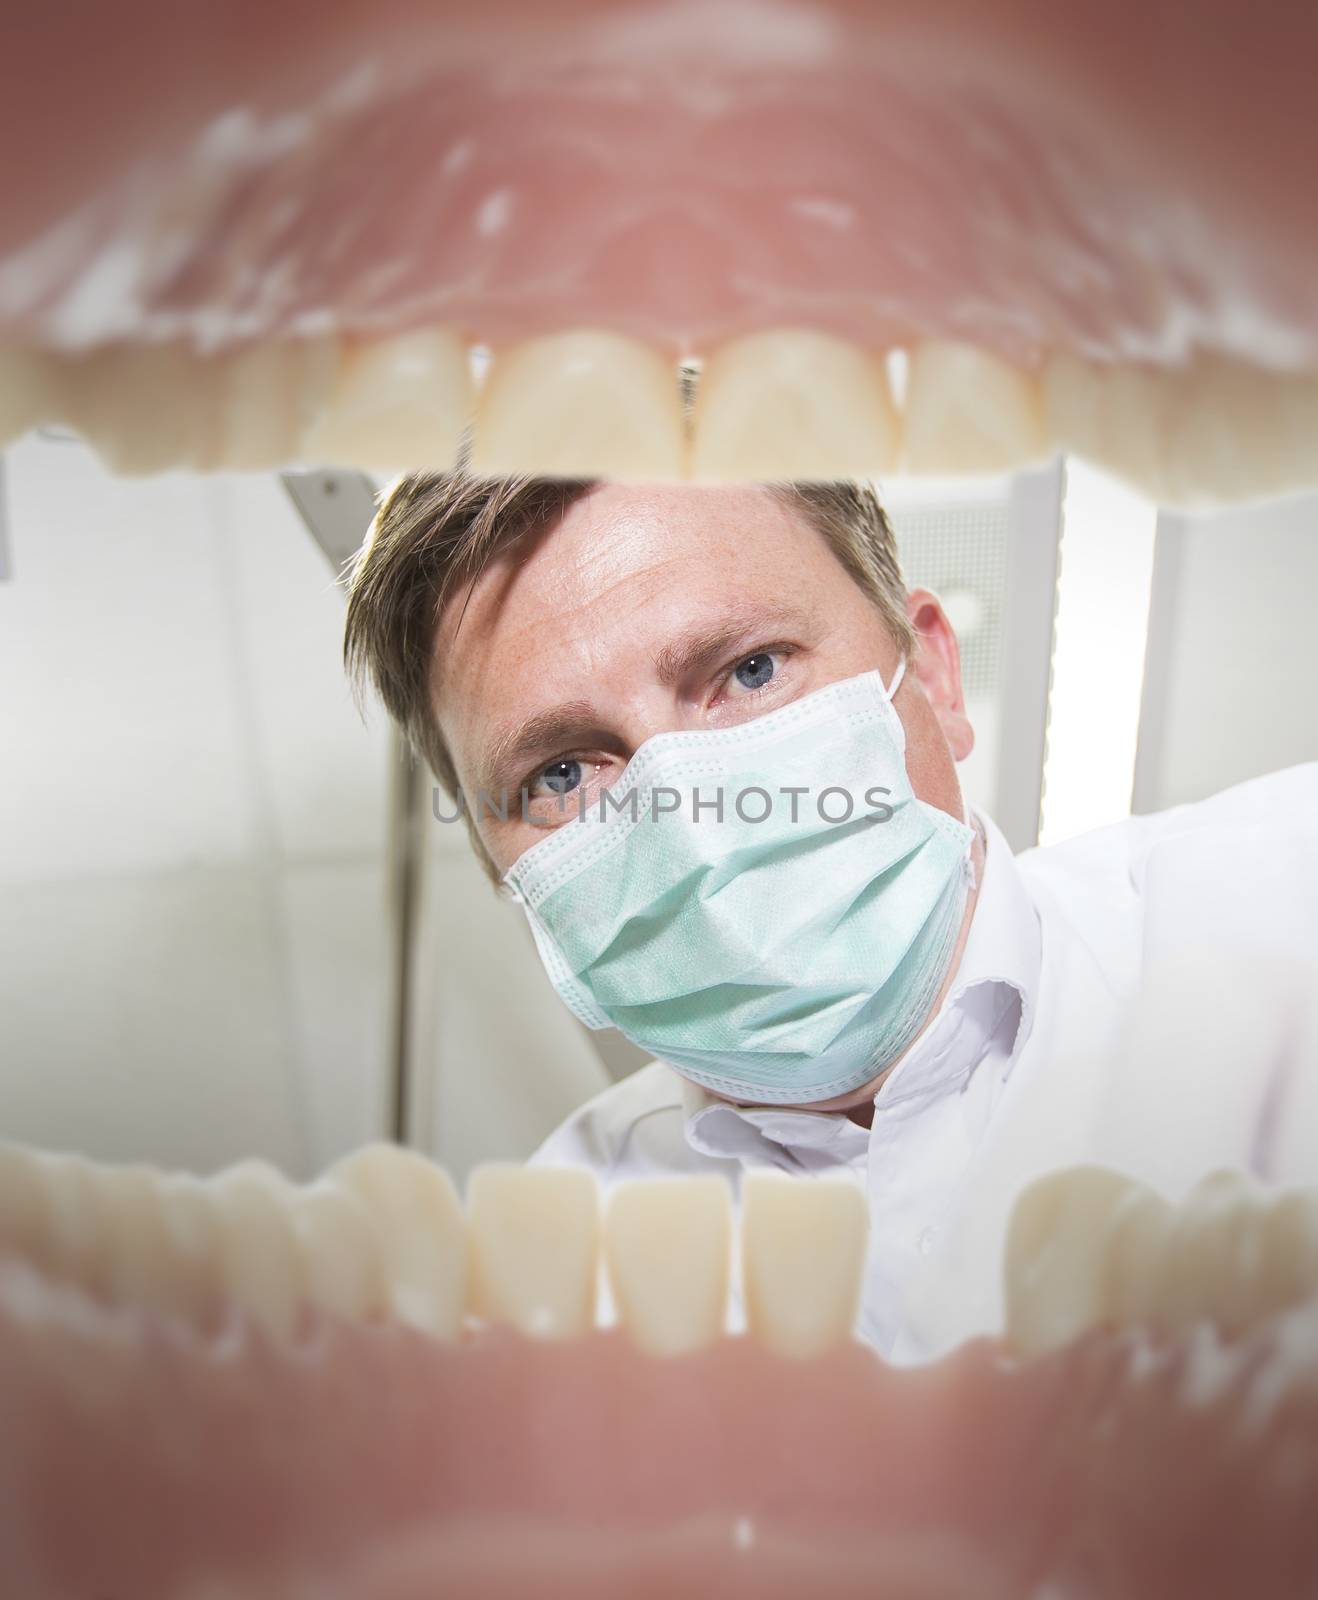 View of a dentist from the inside of mouth